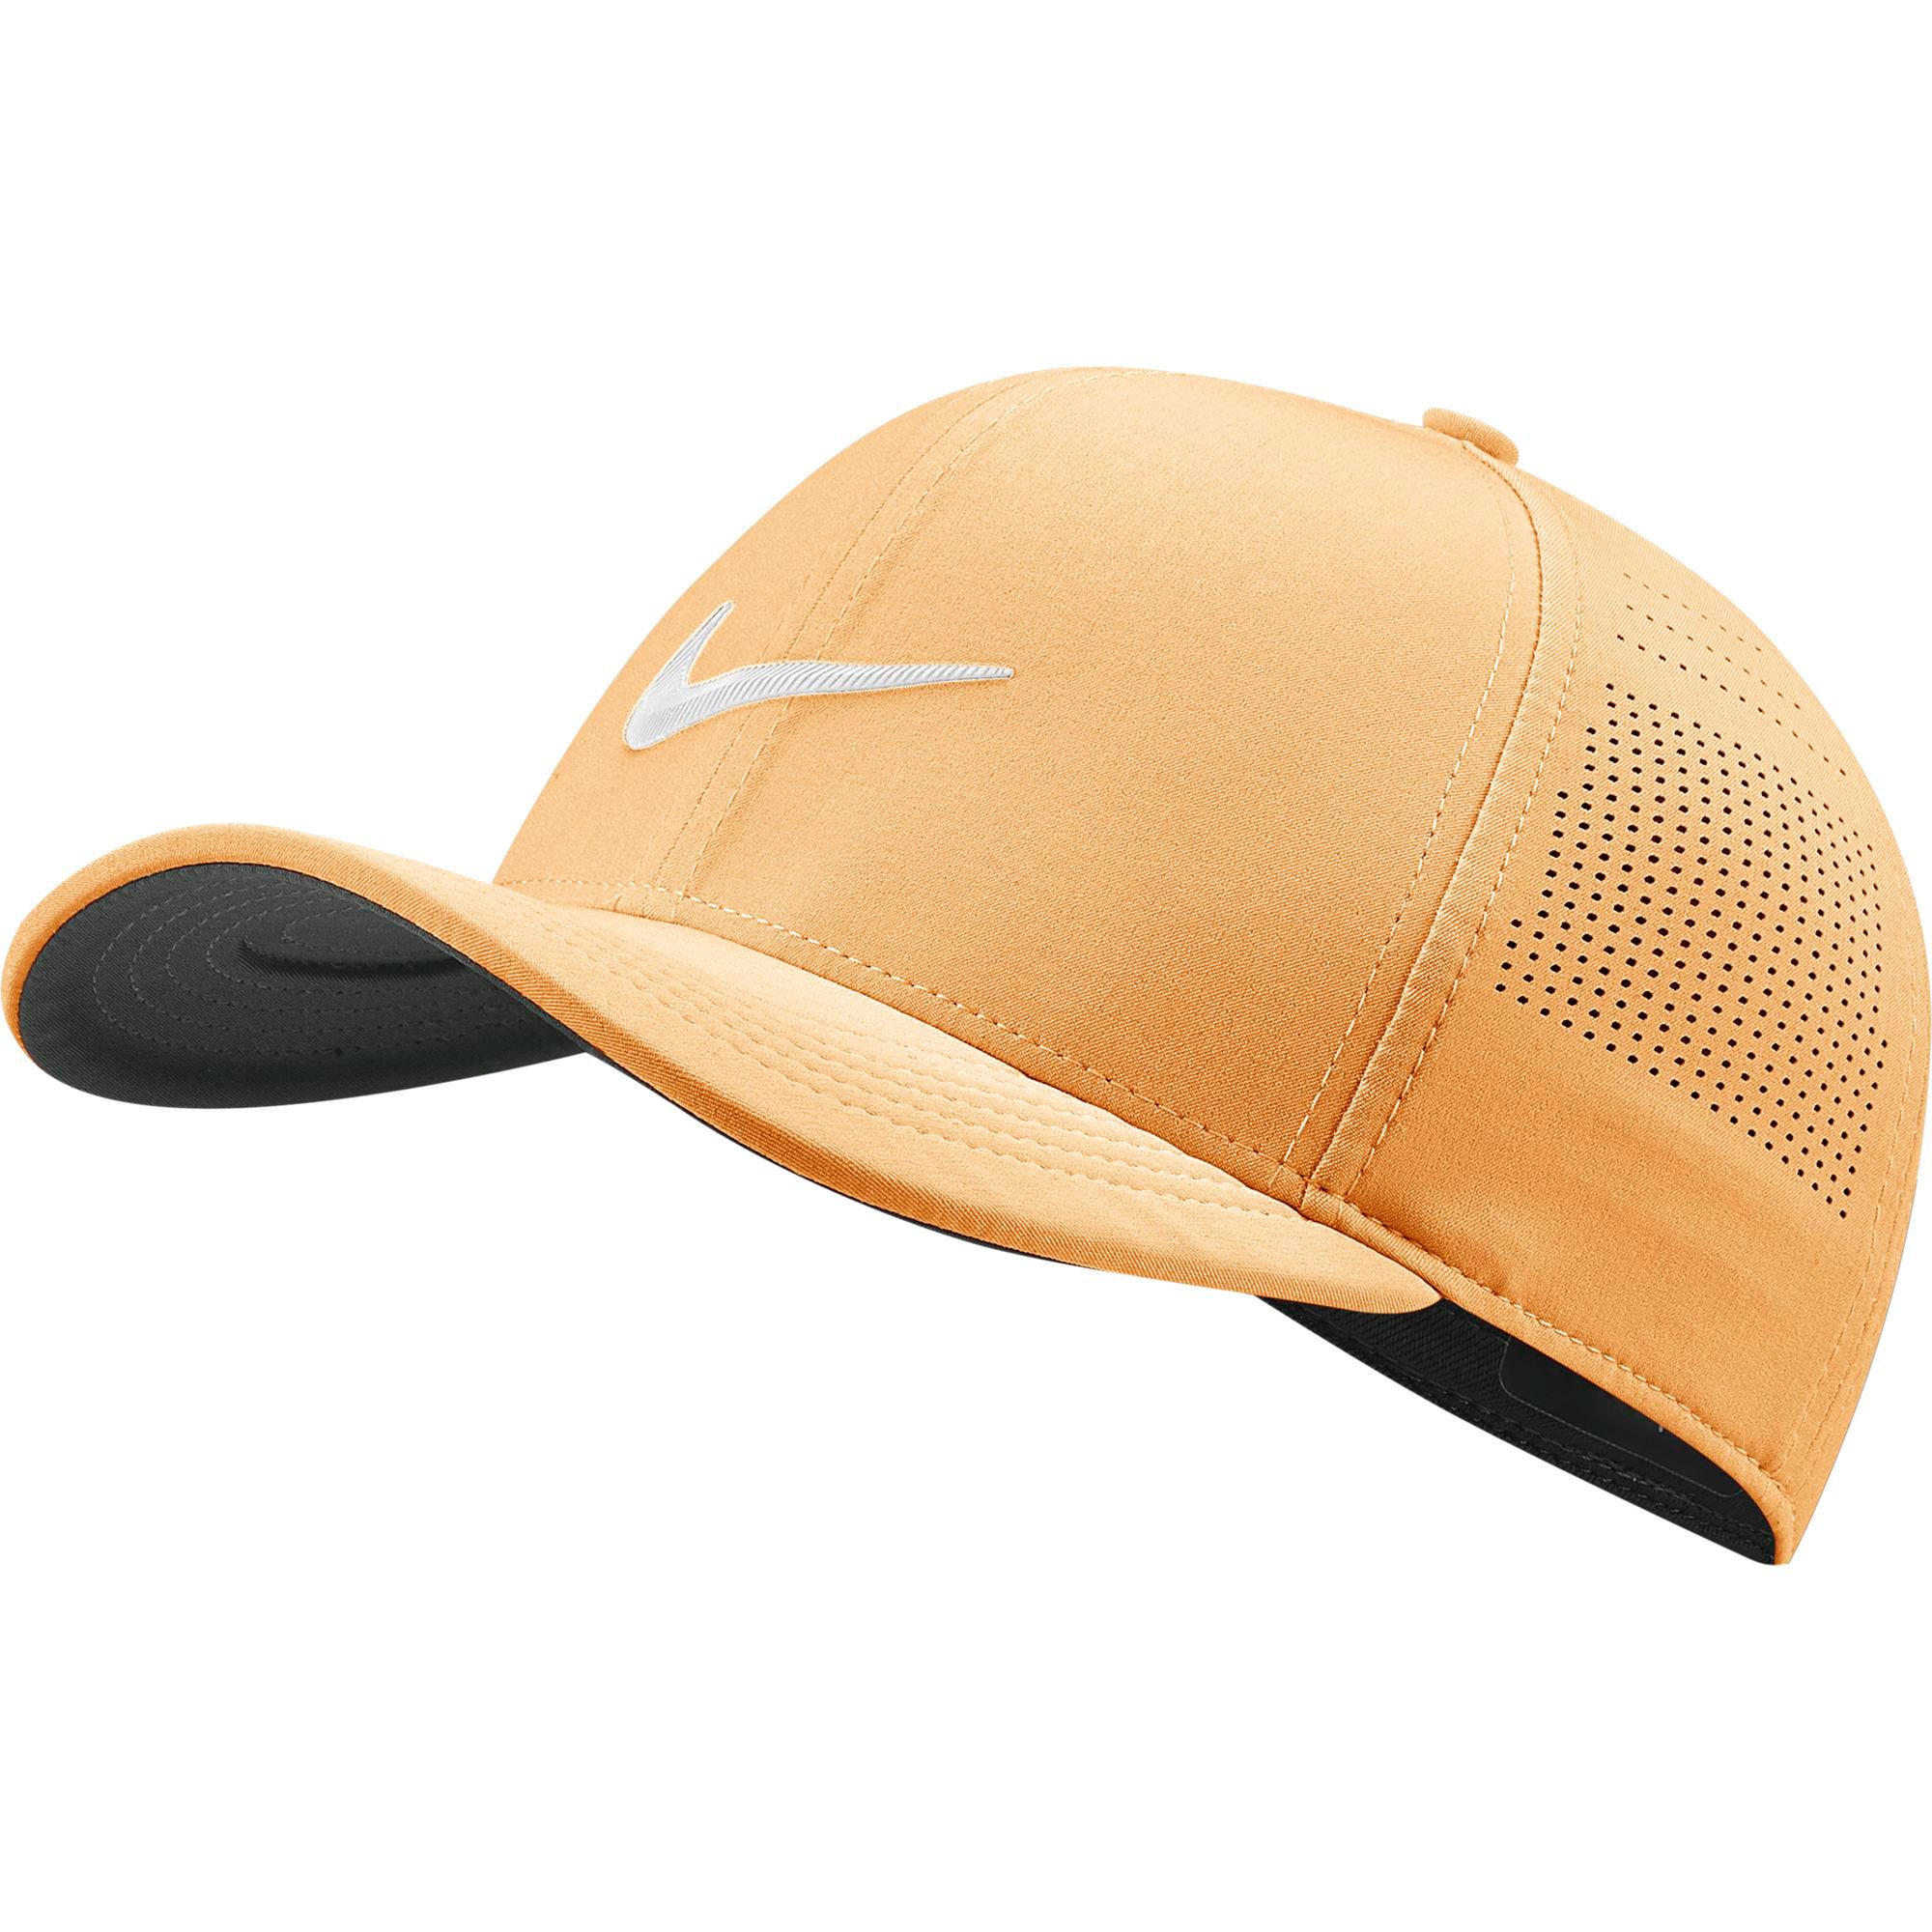 nike men's 2020 aerobill classic99 perforated golf hat